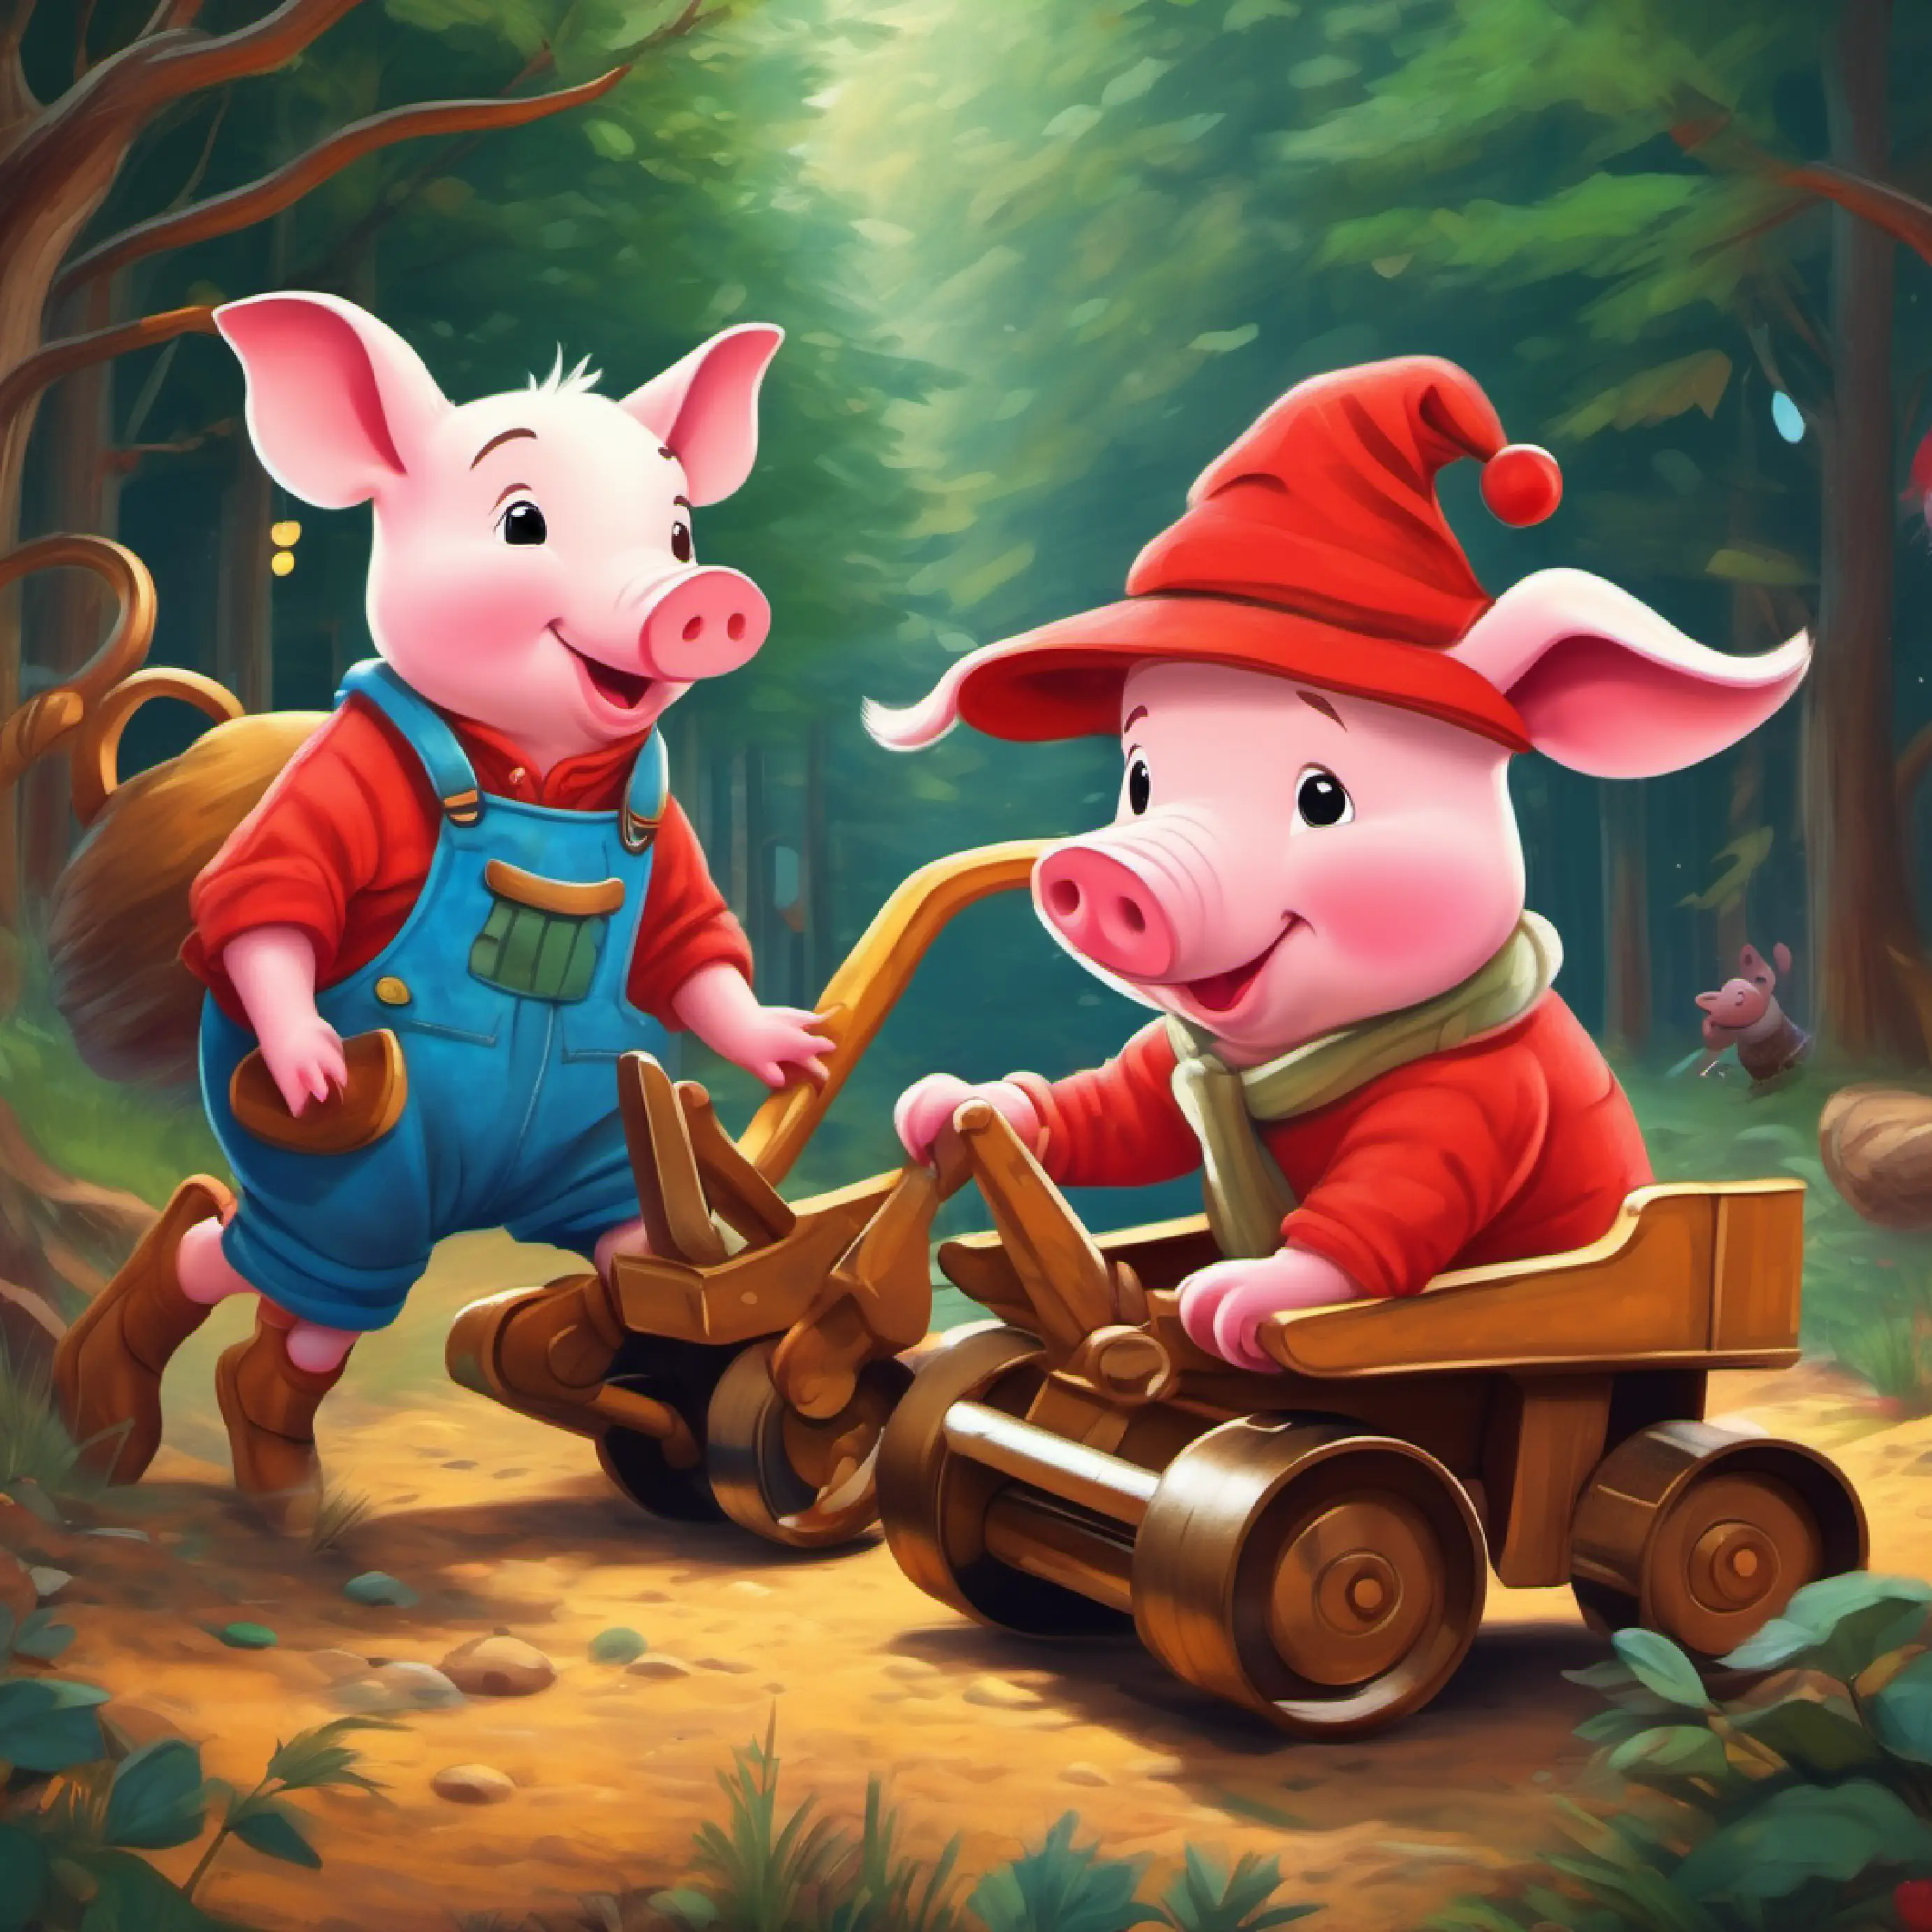 Piglet and Digger start playing together.